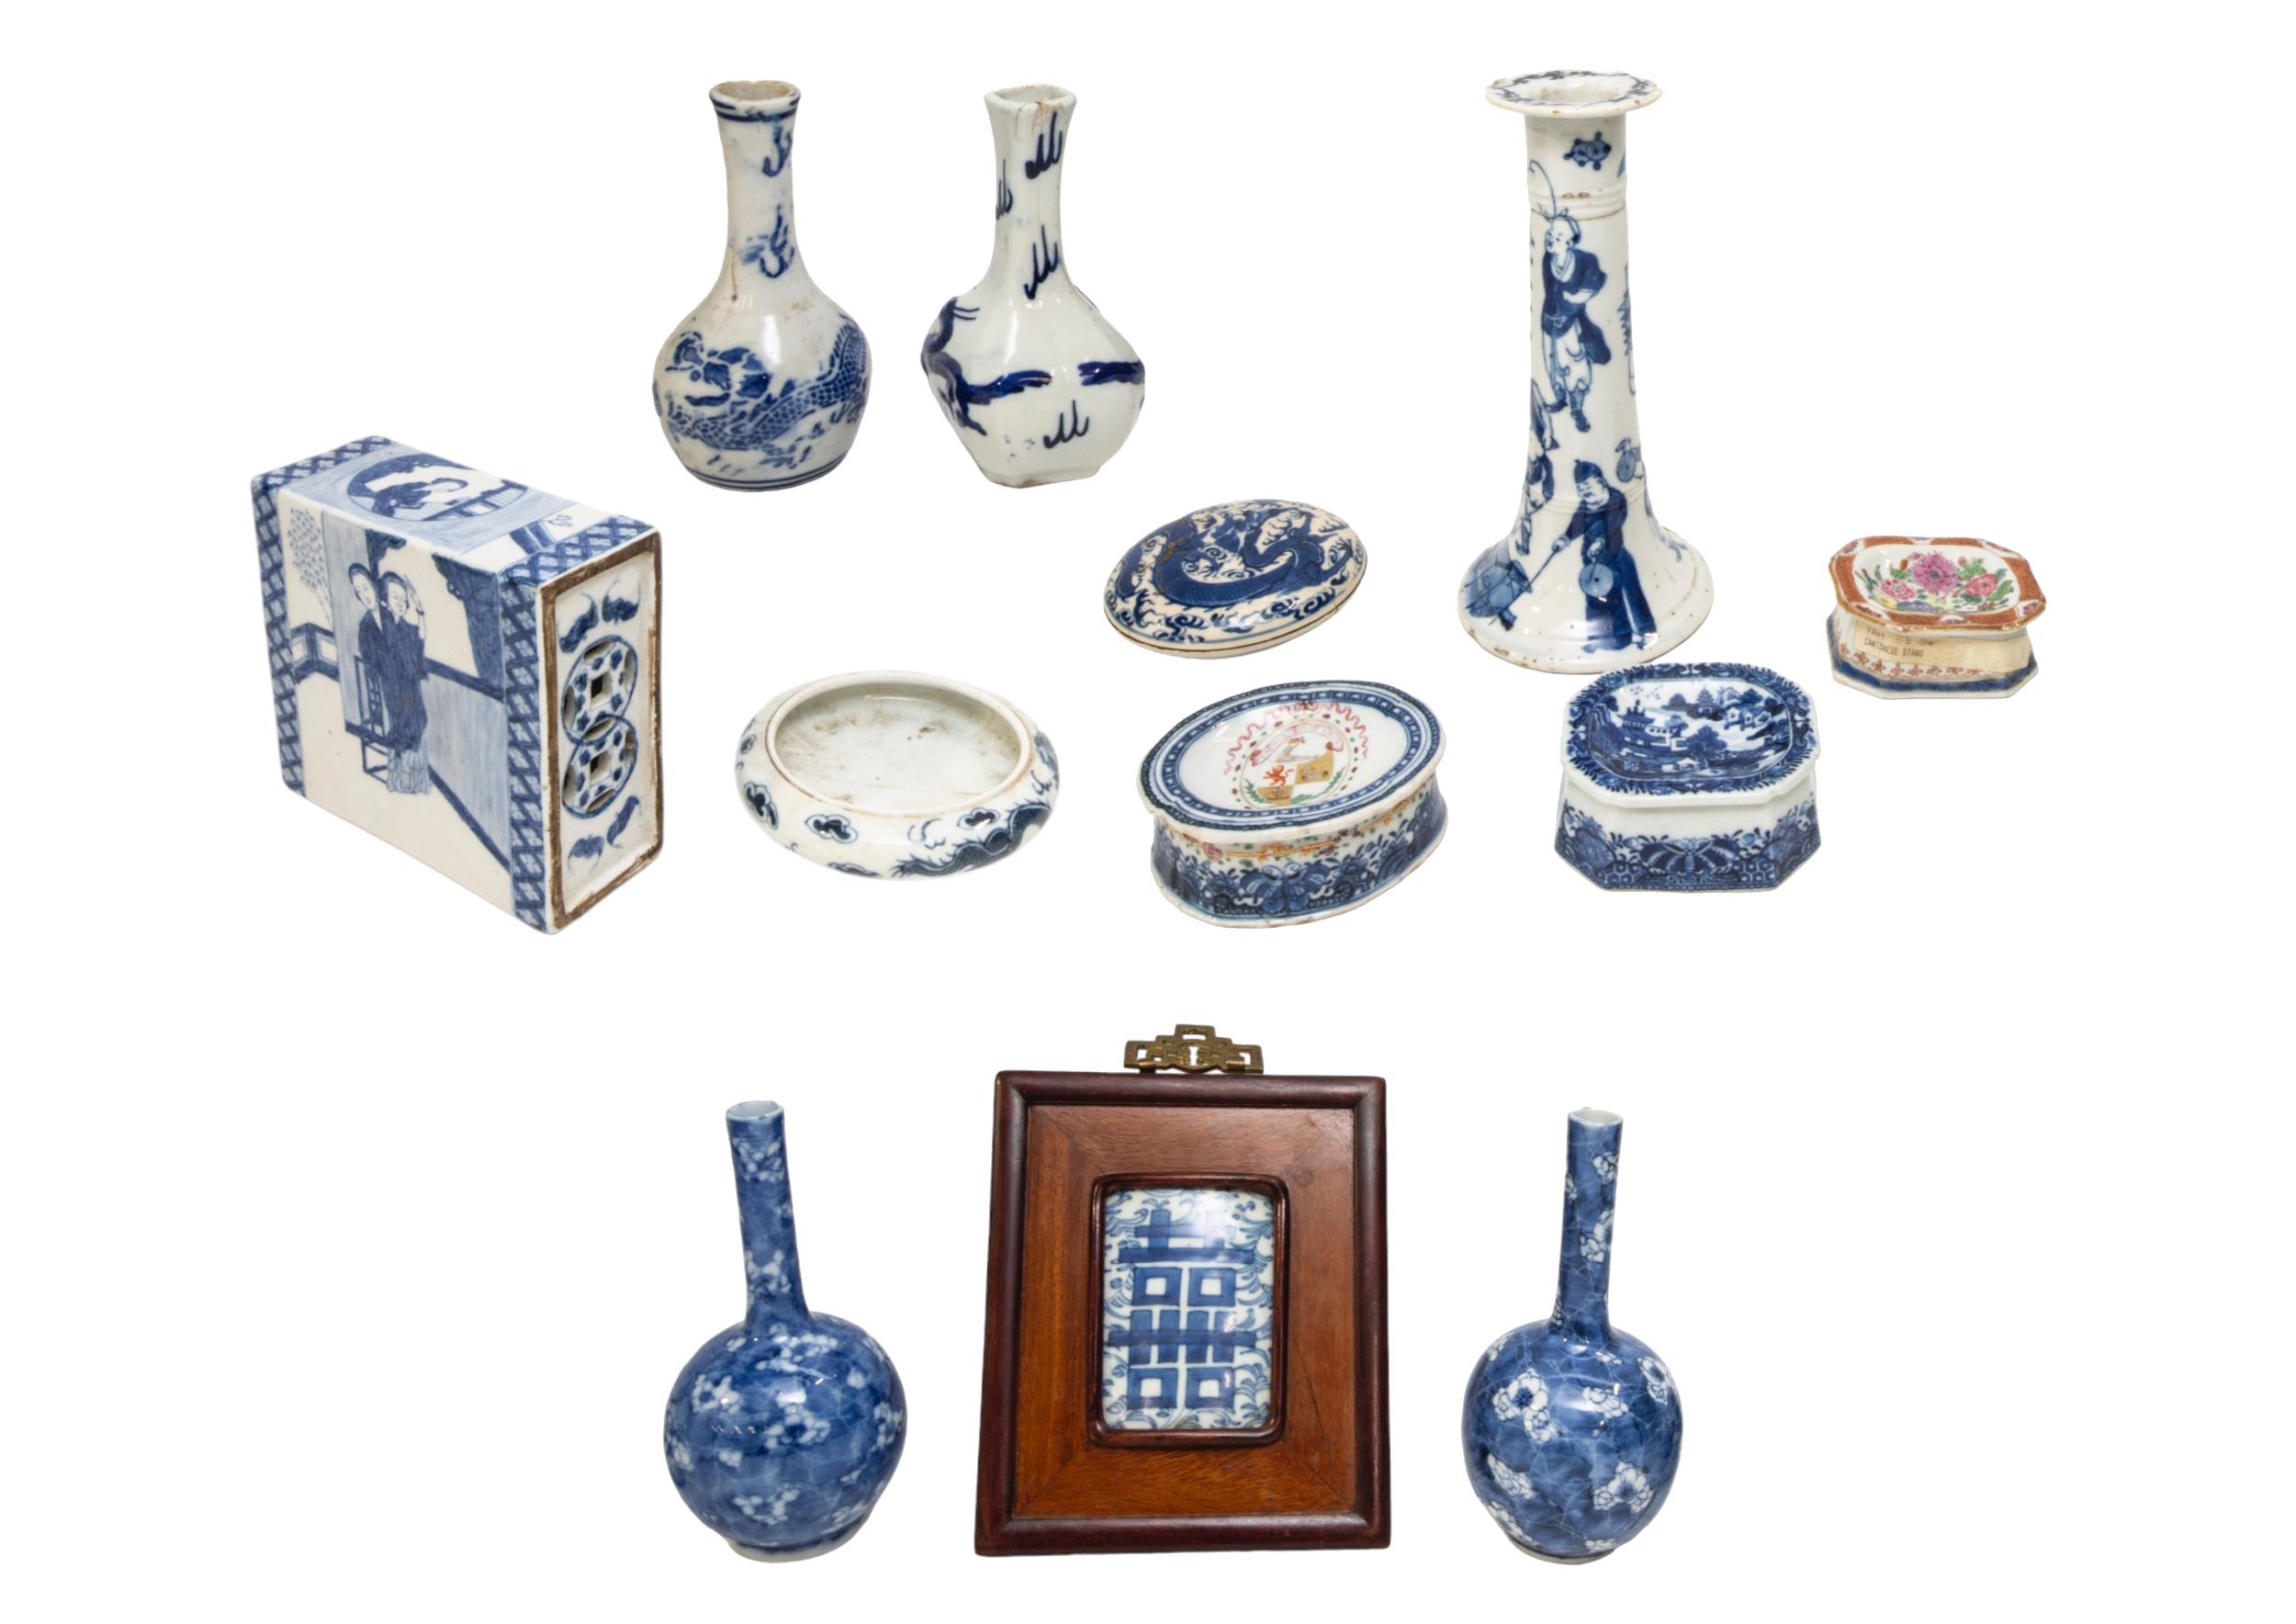 A SMALL COLLECTION OF CHINESE PORCELAIN WARES, MAINLY 19TH CENTURY, the lot includes three Chinese